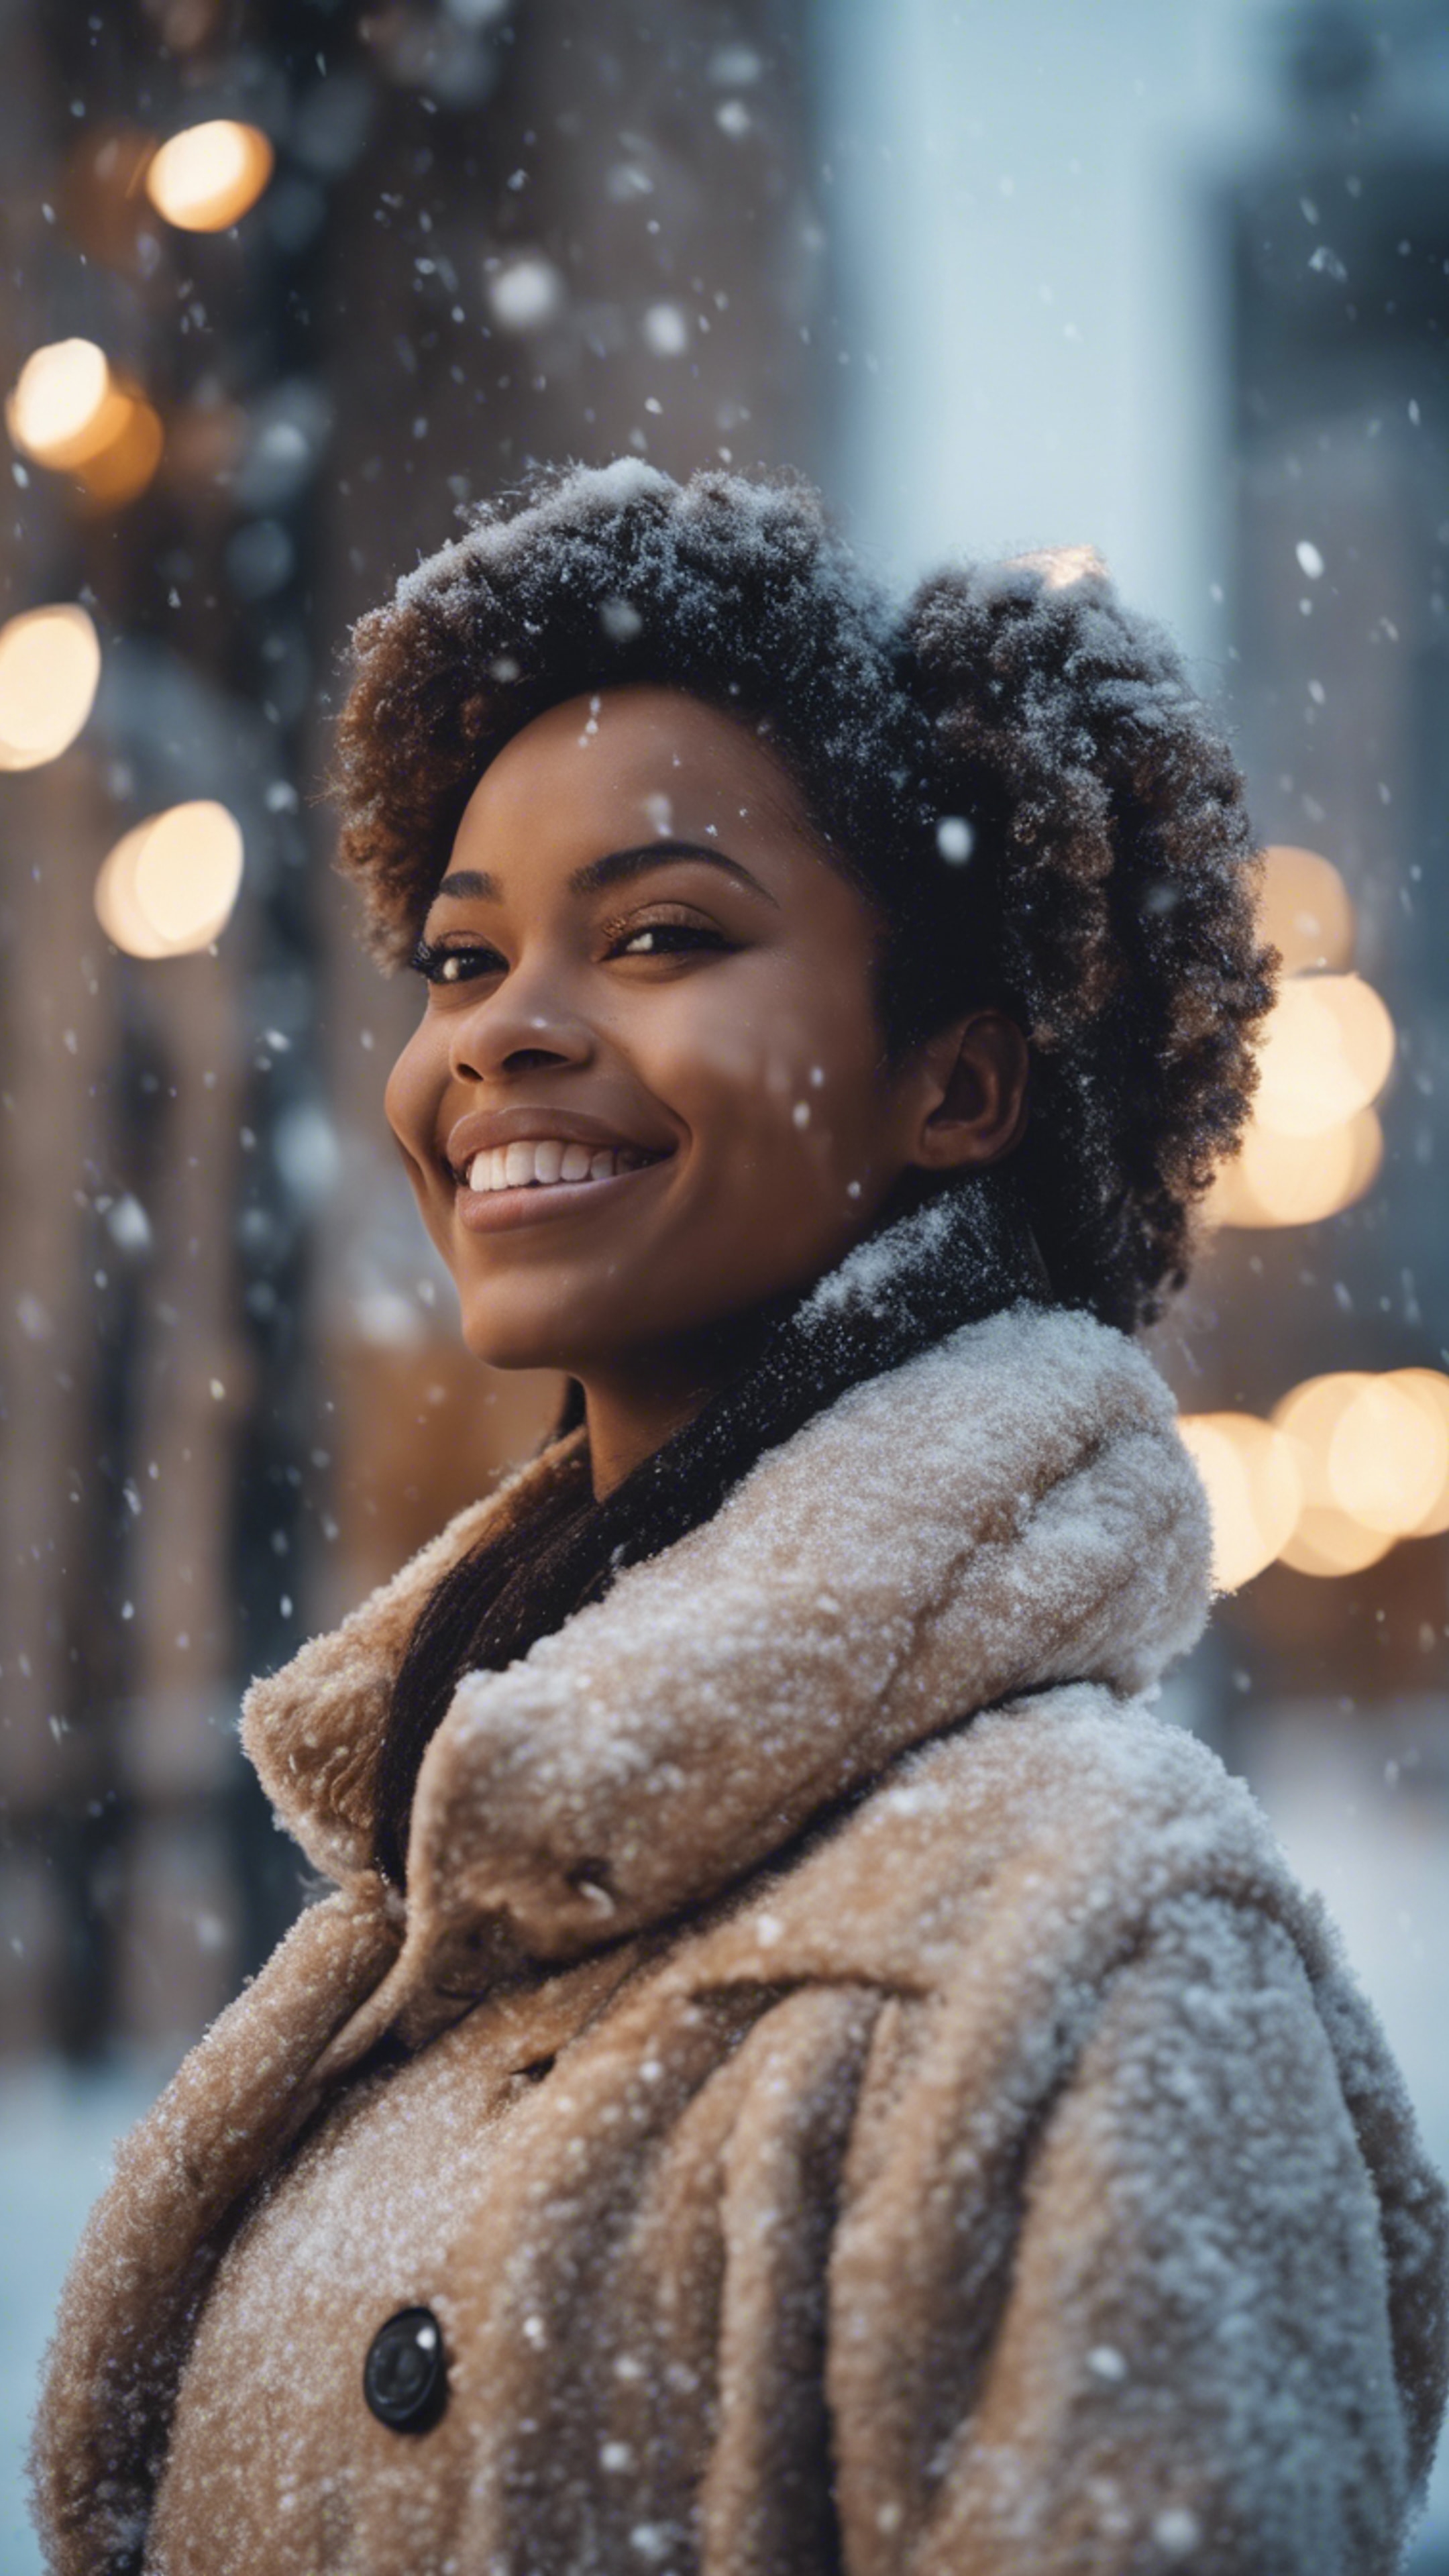 A beautiful black girl in a stylish winter coat, her warm smile glowing against the snowy city backdrop. Wallpaper[cd91f58d07824077a874]